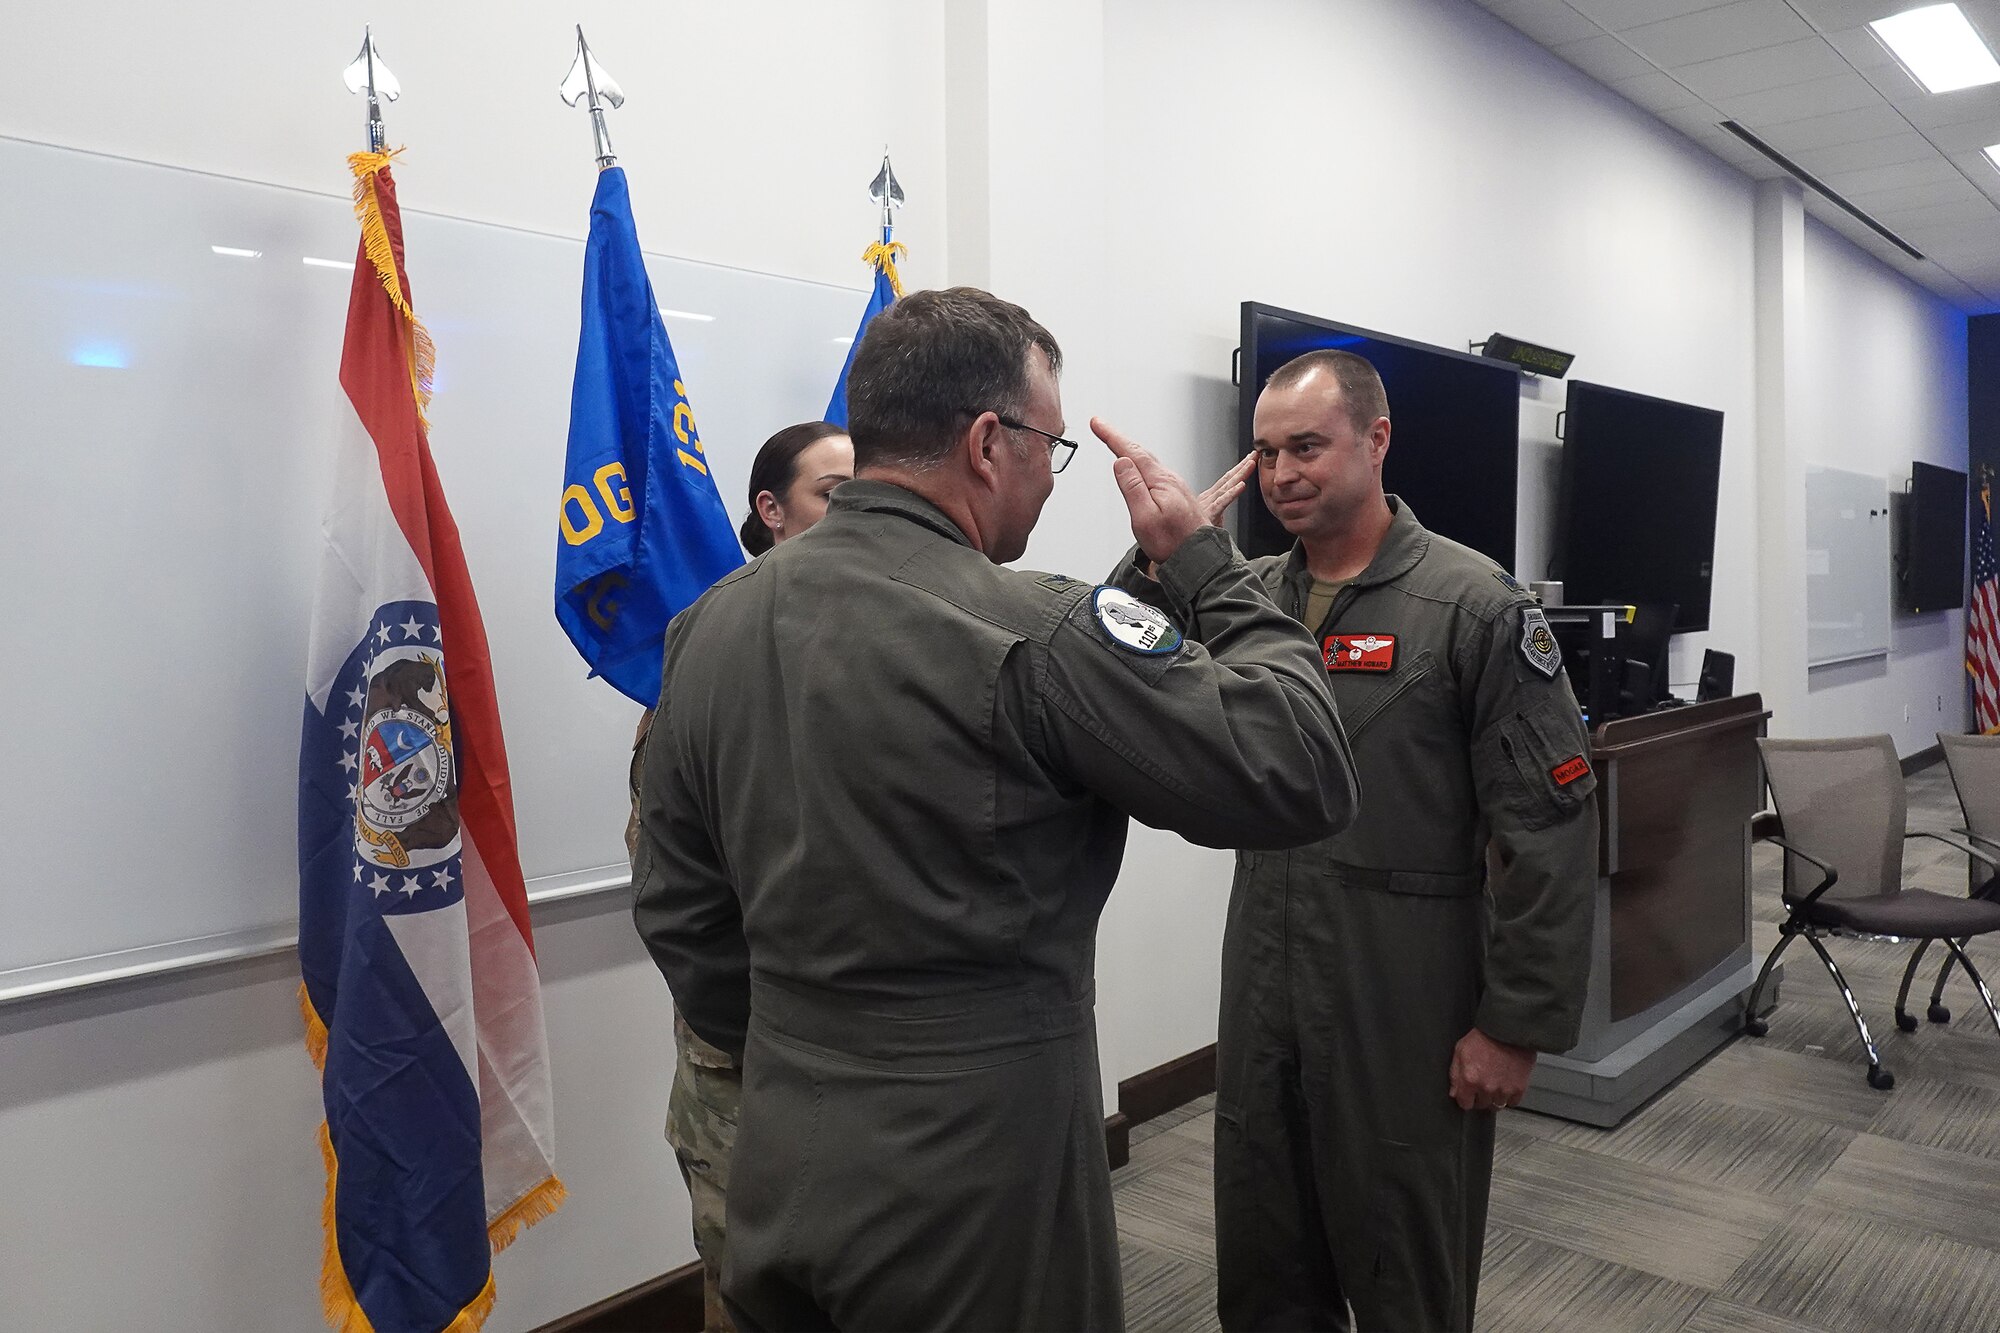 From left, Col. Jared Kennish, 131st Bomb Wing commander, exchanges a salute with Lt. Col. Matthew Howard, incoming 131st Operations Group commander during an assumption of command ceremony April 2, 2023, at Whiteman Air Force Base, Missouri. Howard took command of the group from retired Col. Luke Jayne, who retired in March 2023. (U.S. Air National Guard photo by Airman 1st Class Phoenix Lietch)